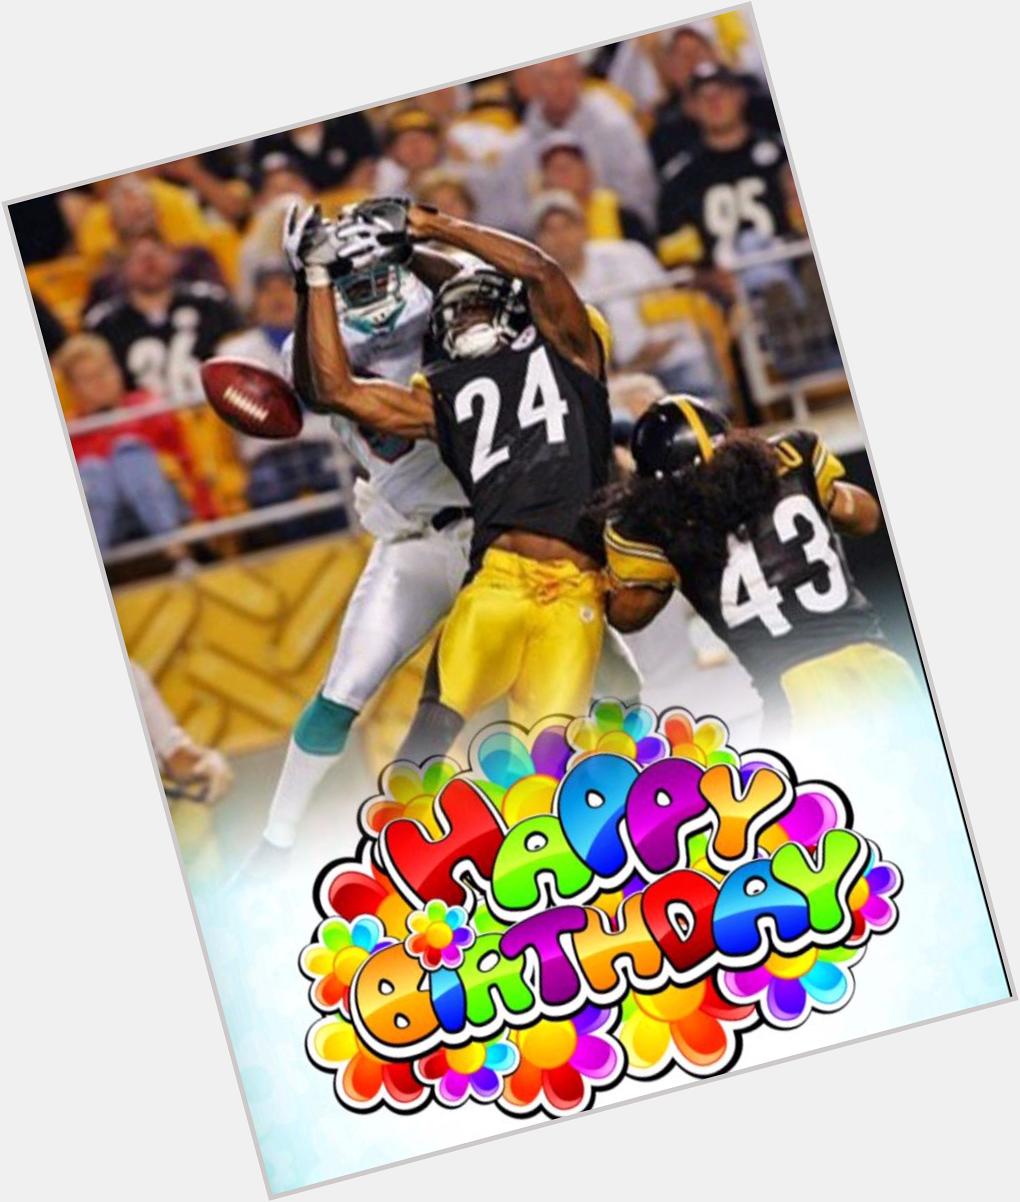 Happy Birthday to Ike Taylor! Over his career he totaled 636 tackles, 14 interceptions and also has two SB rings 